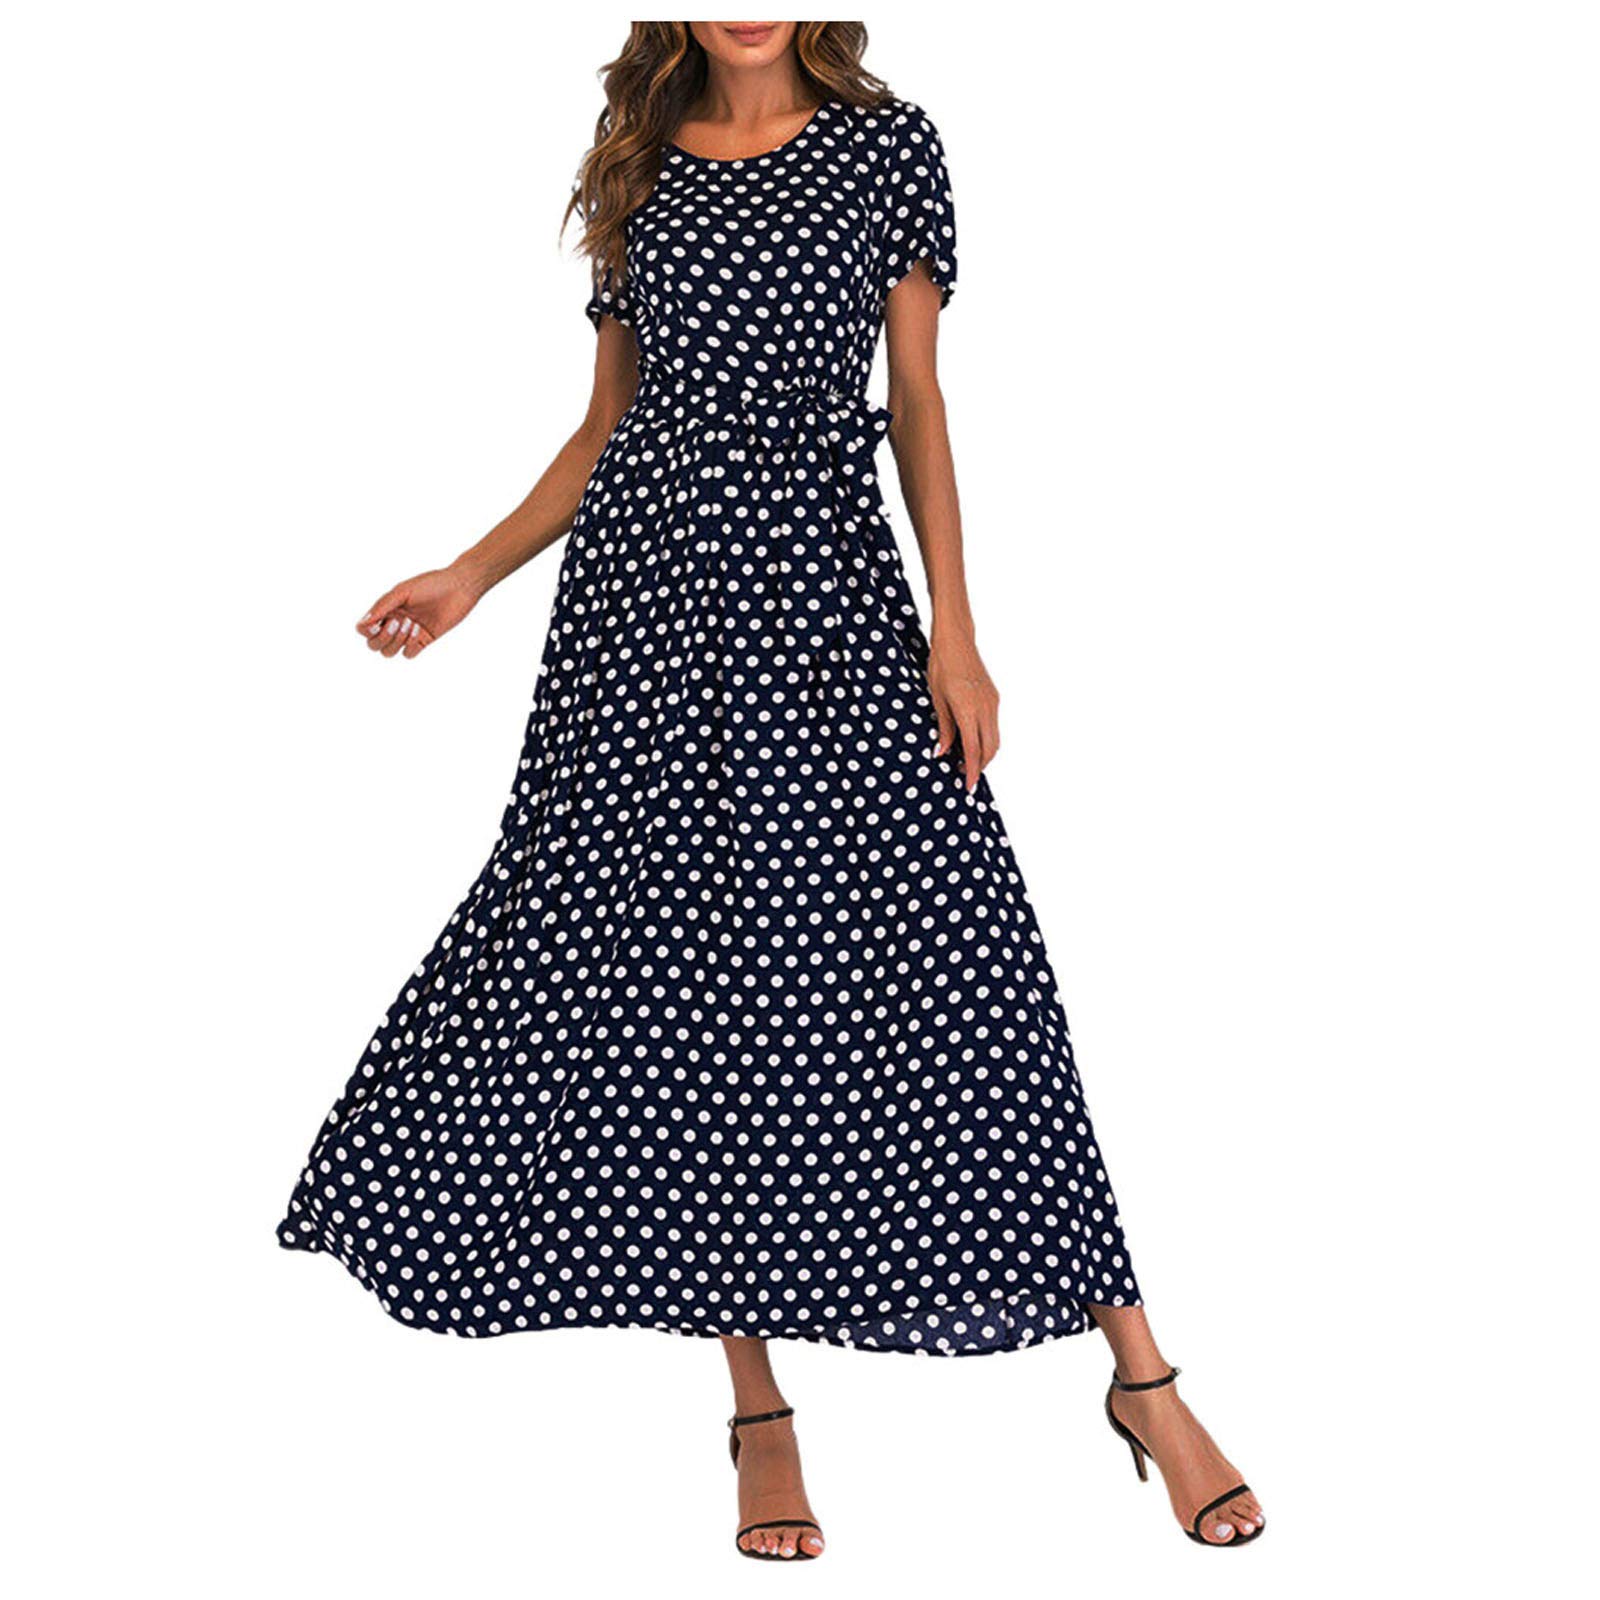 Dresses for Women 2022 Summer Casual Sleeveless Sundresses Floral Print  Pleated Beach Plus Size Dress